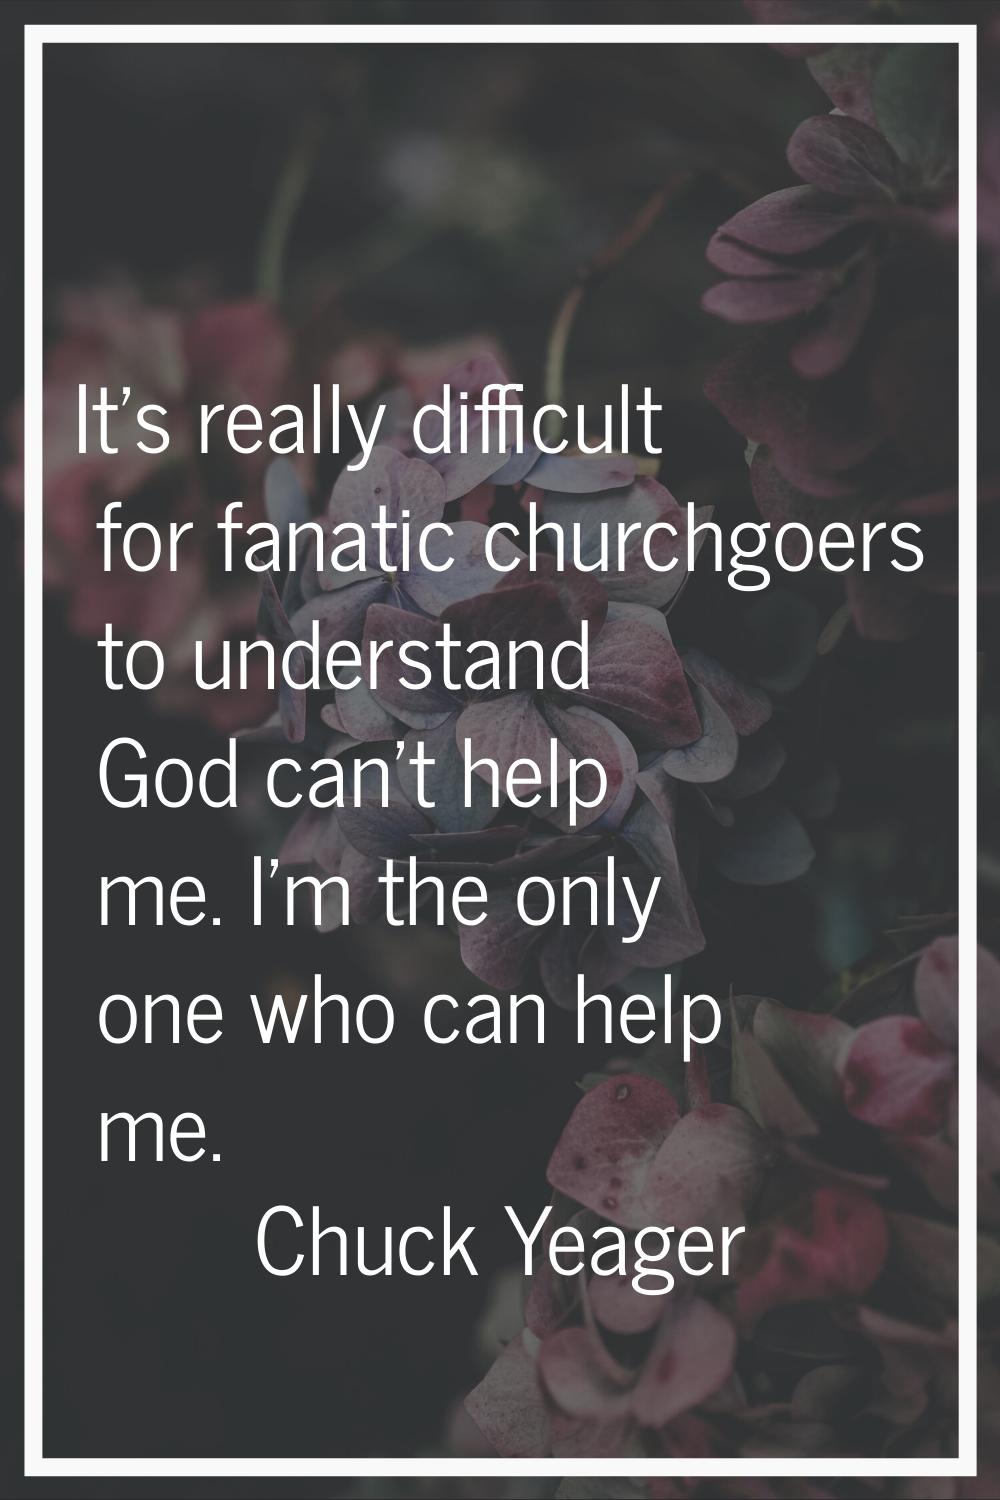 It's really difficult for fanatic churchgoers to understand God can't help me. I'm the only one who